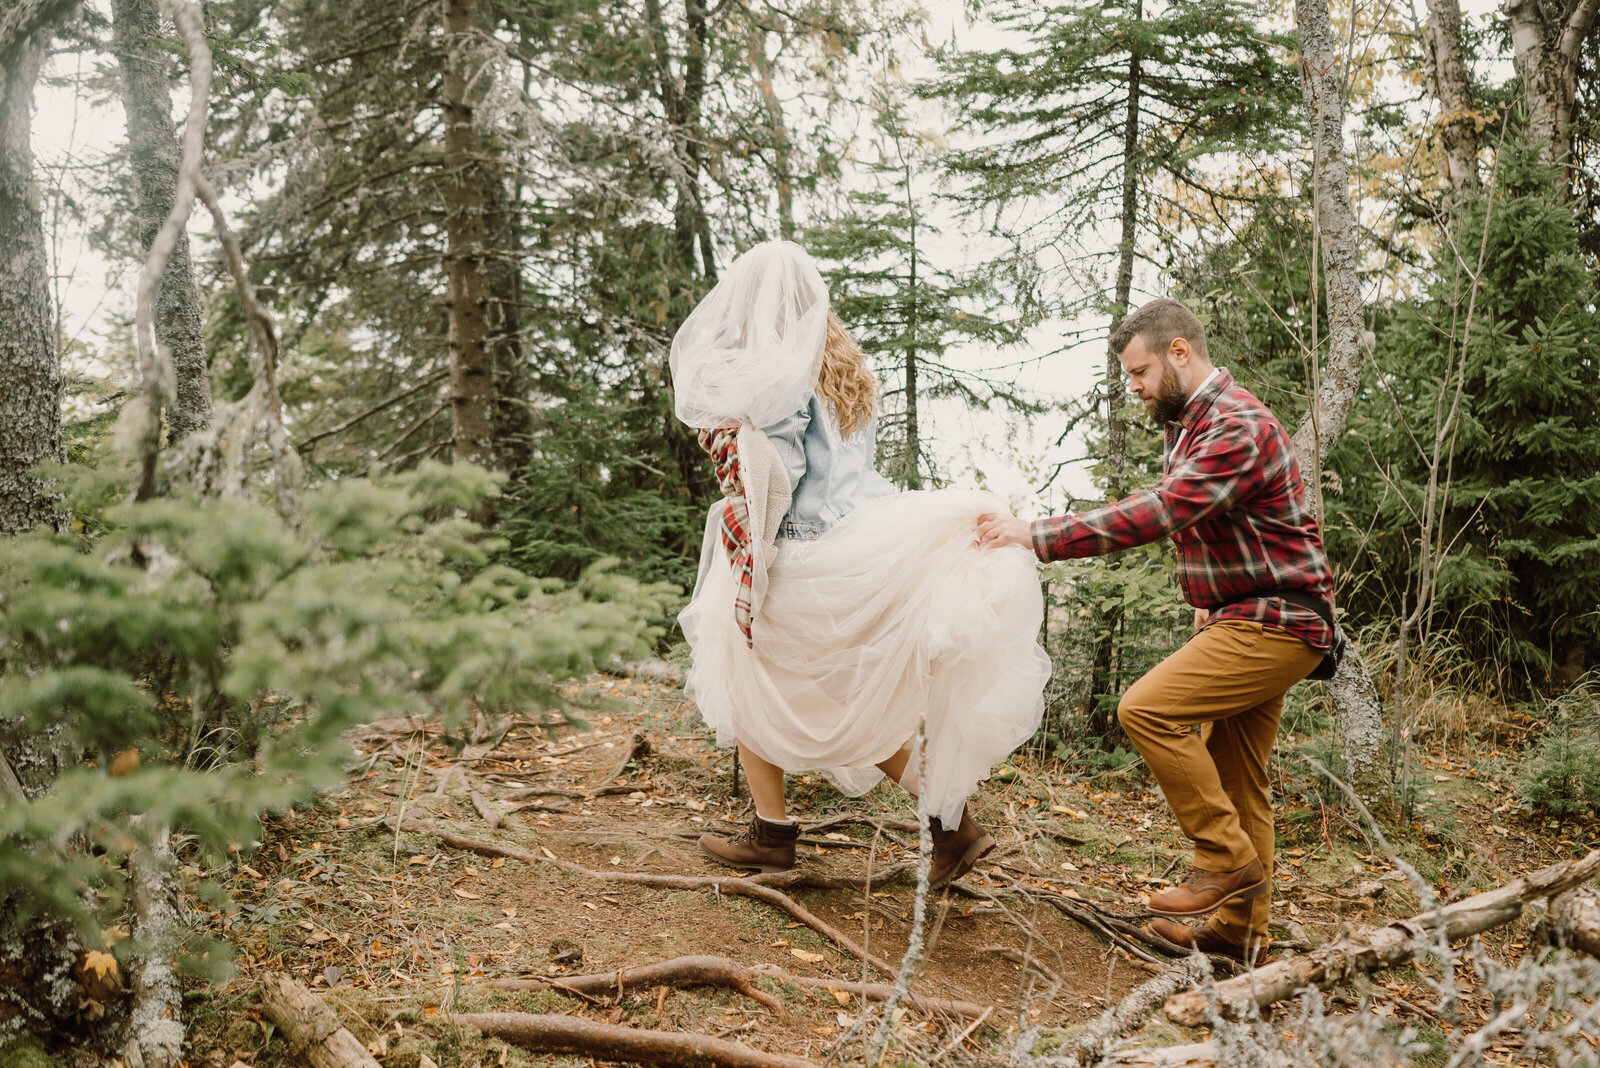 Groom help bride carry her dress and hike through forest